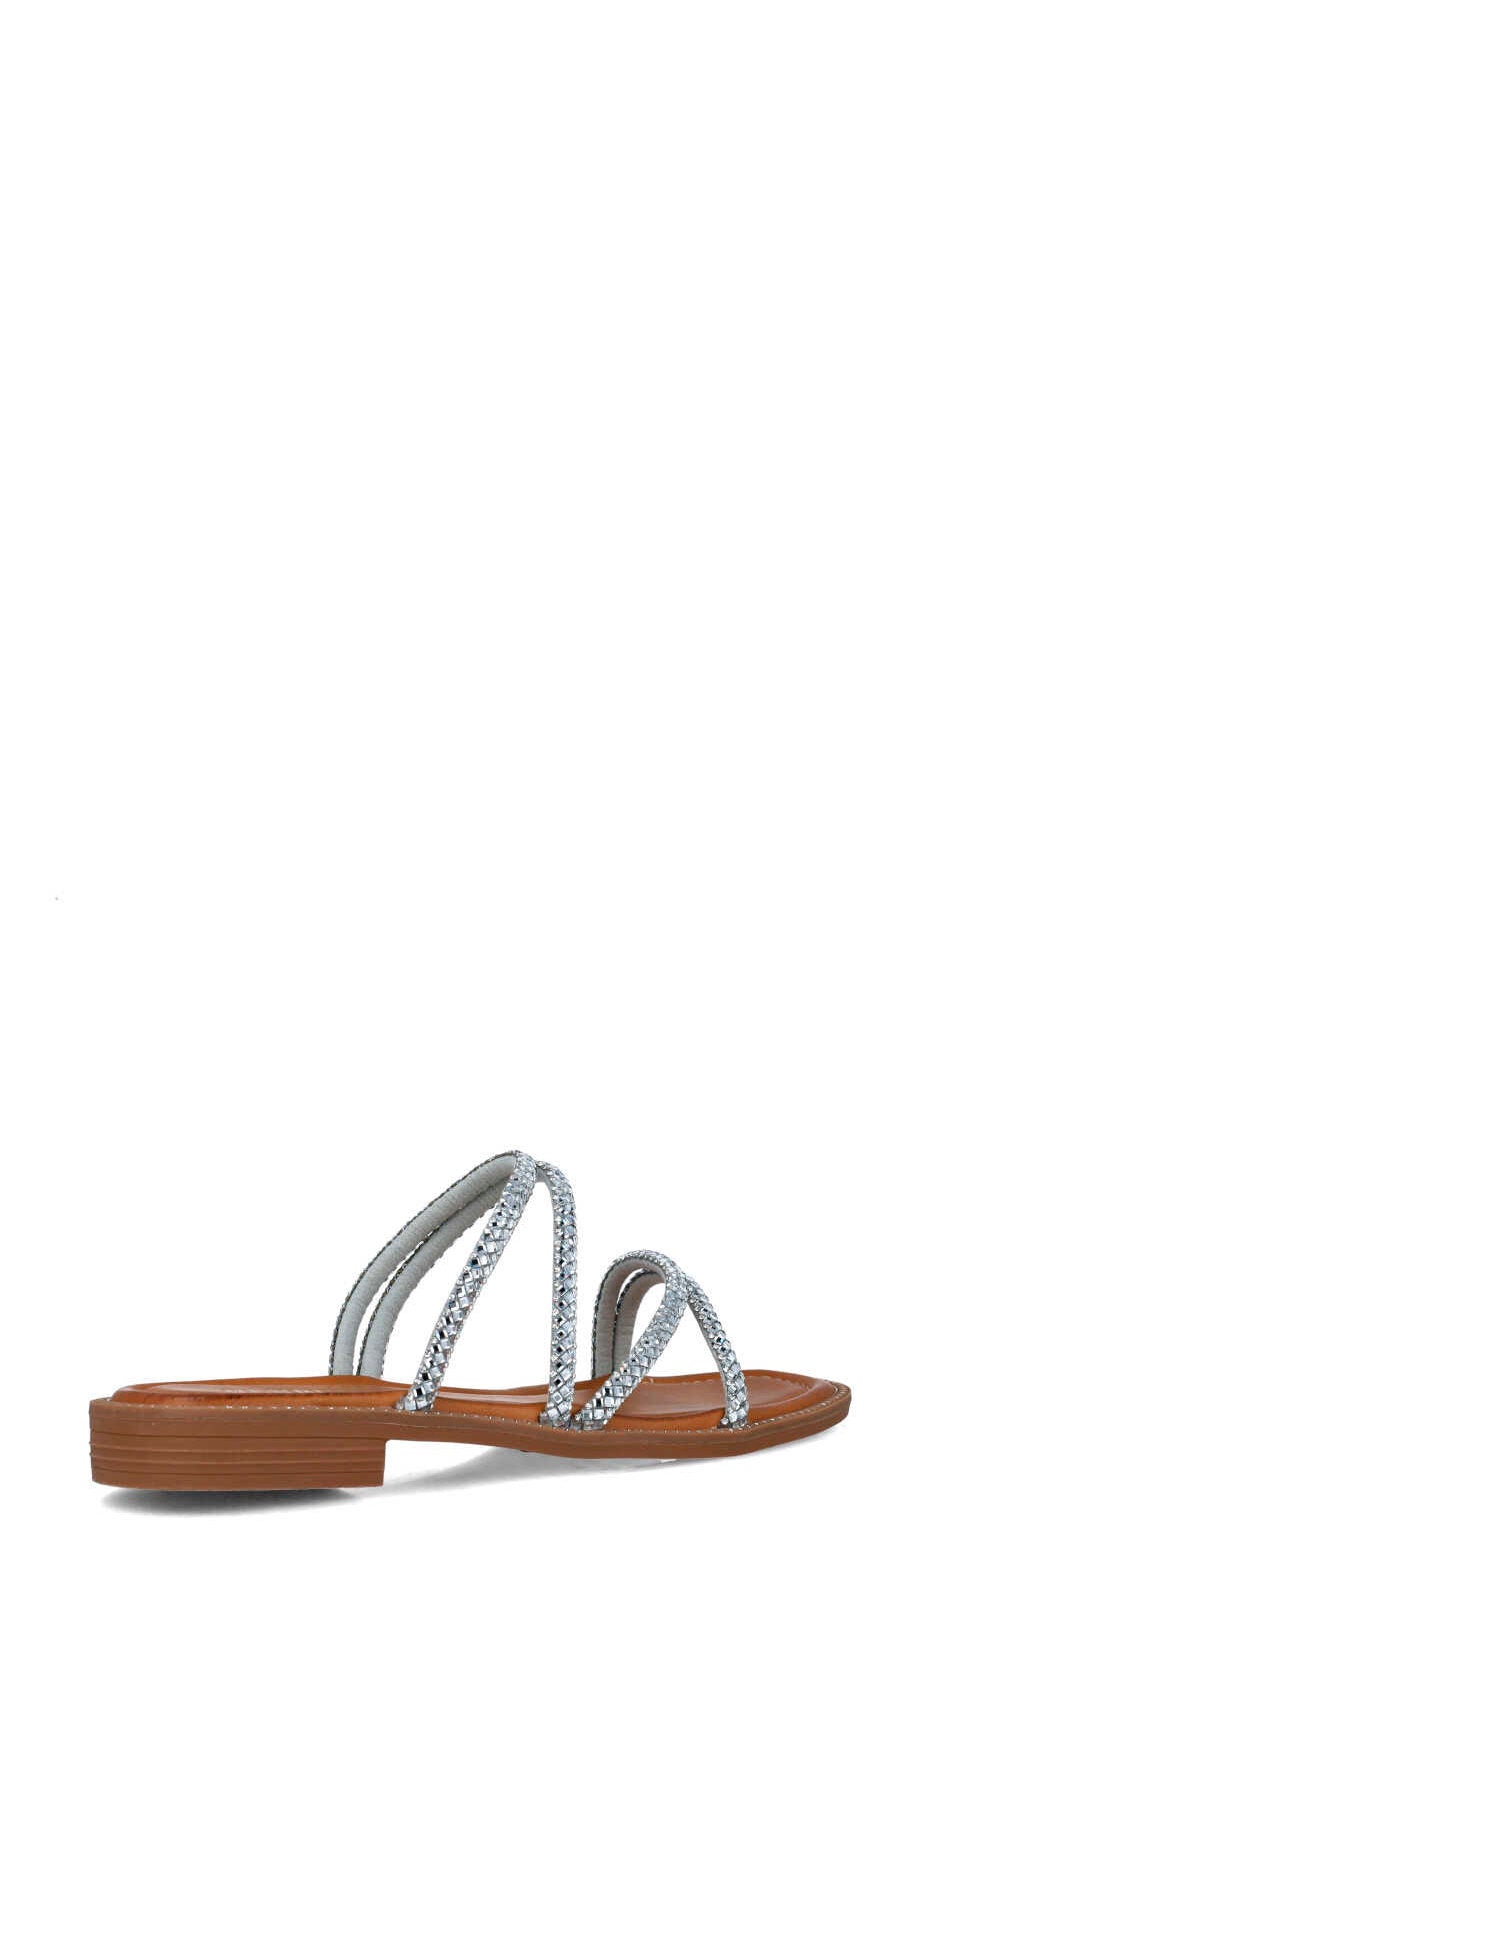 Brown Slippers With Silver Embellished Straps_24910_09_03